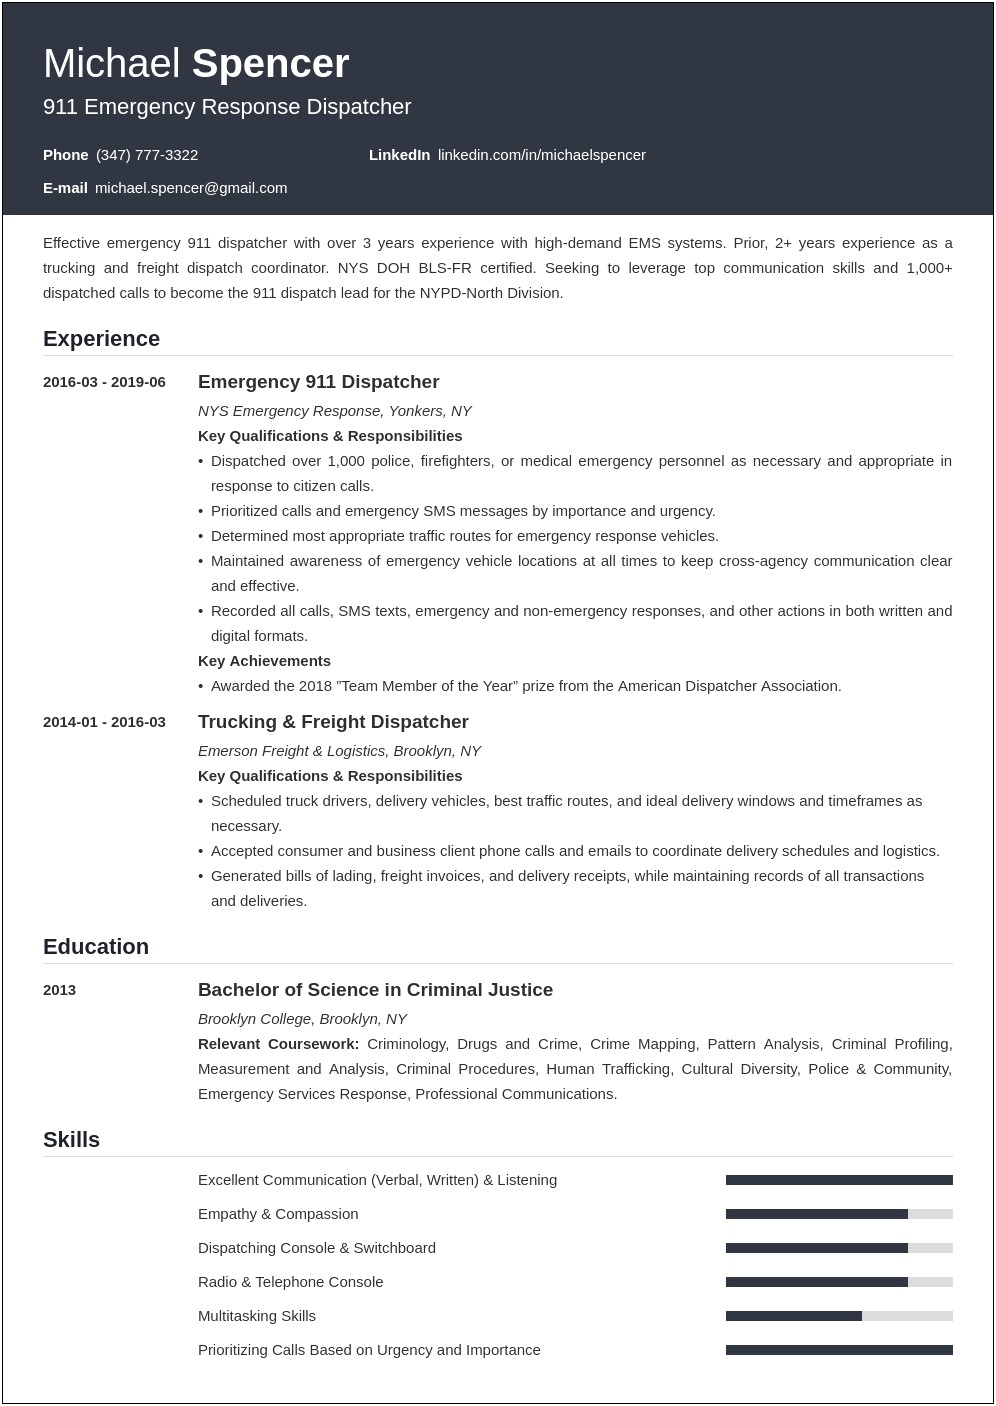 Skills And Abilities For A Dispatcher Resume